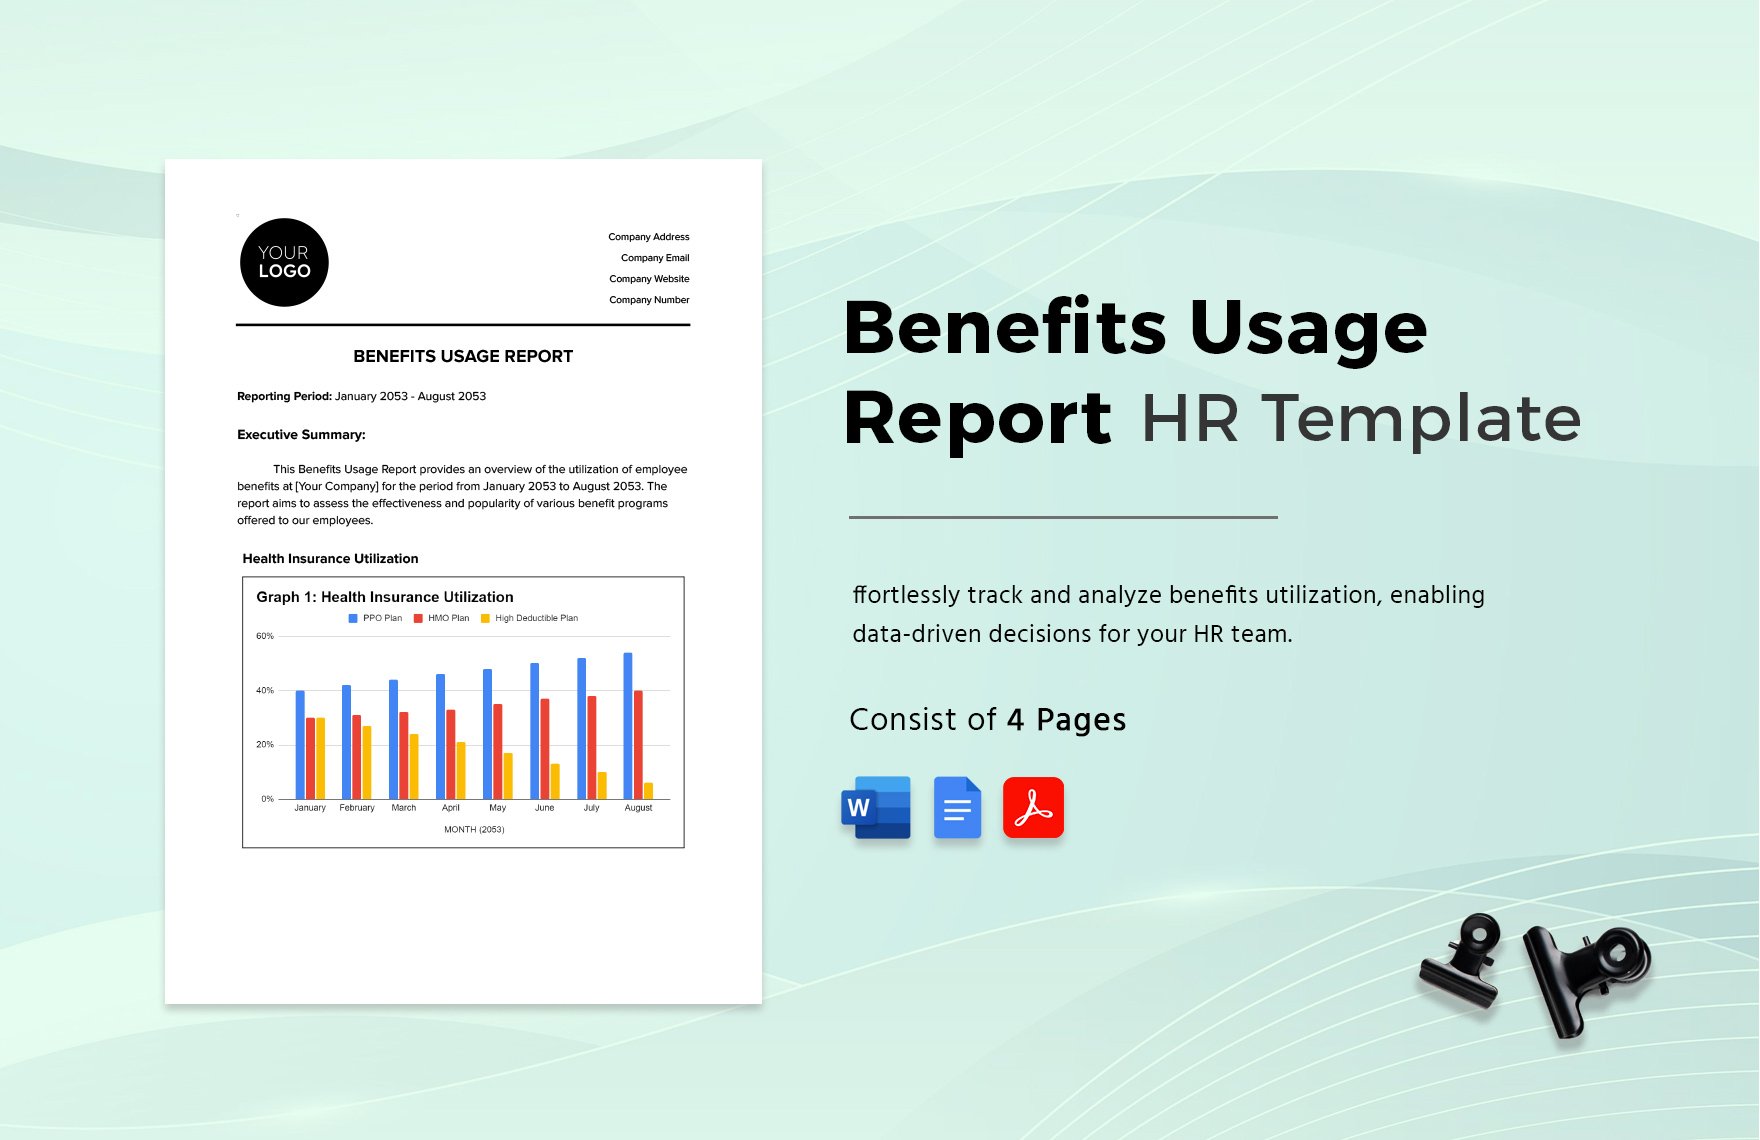 Benefits Usage Report HR Template